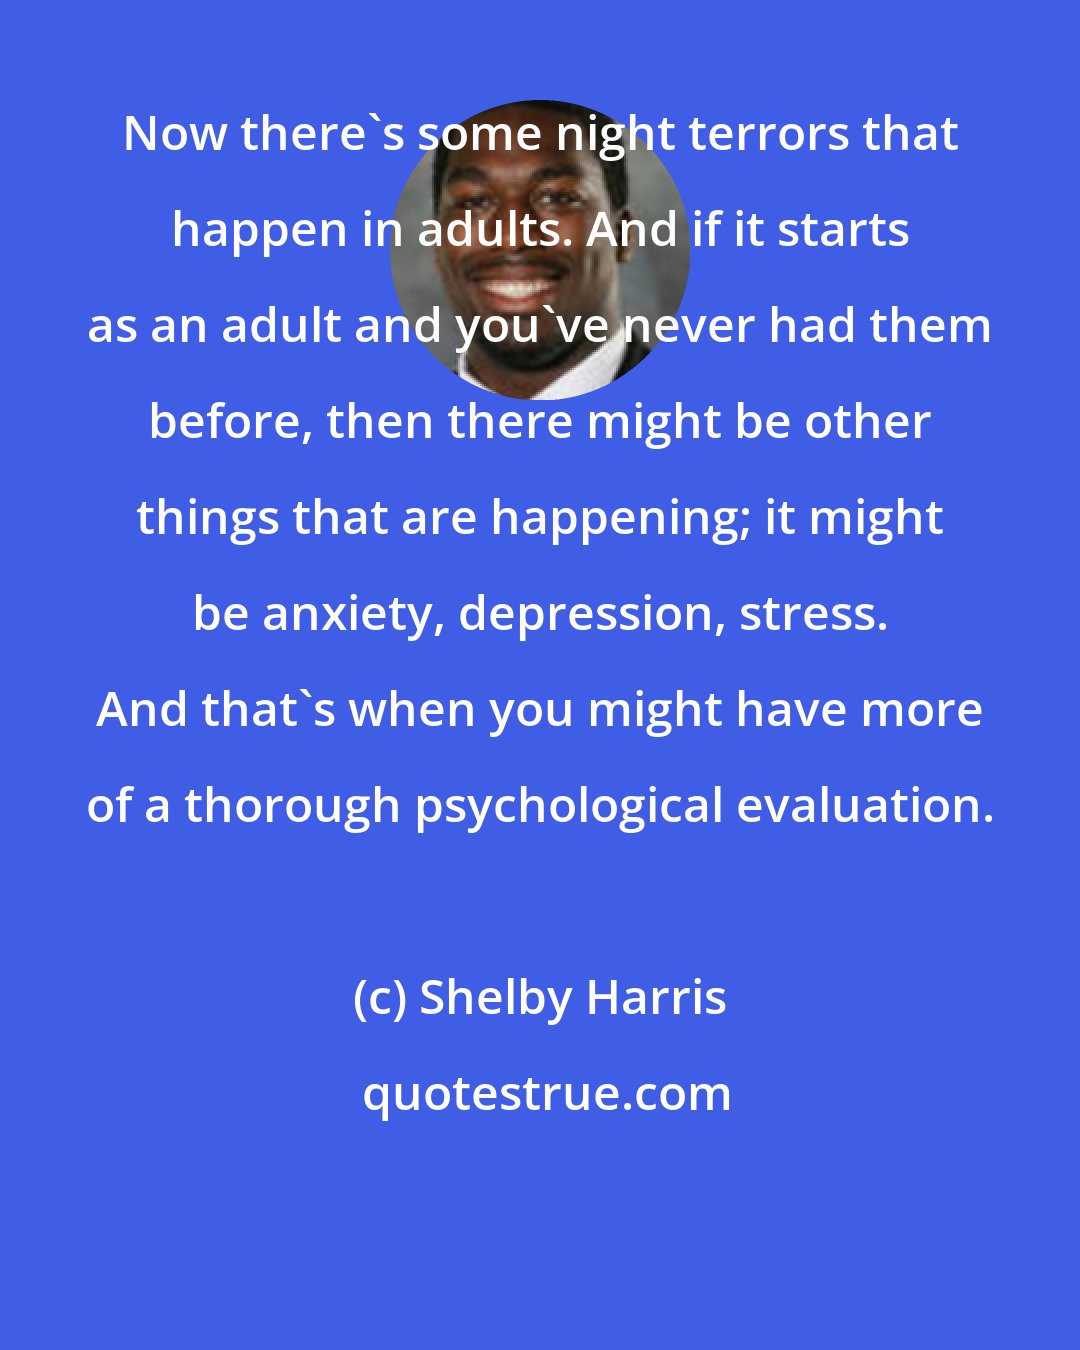 Shelby Harris: Now there's some night terrors that happen in adults. And if it starts as an adult and you've never had them before, then there might be other things that are happening; it might be anxiety, depression, stress. And that's when you might have more of a thorough psychological evaluation.